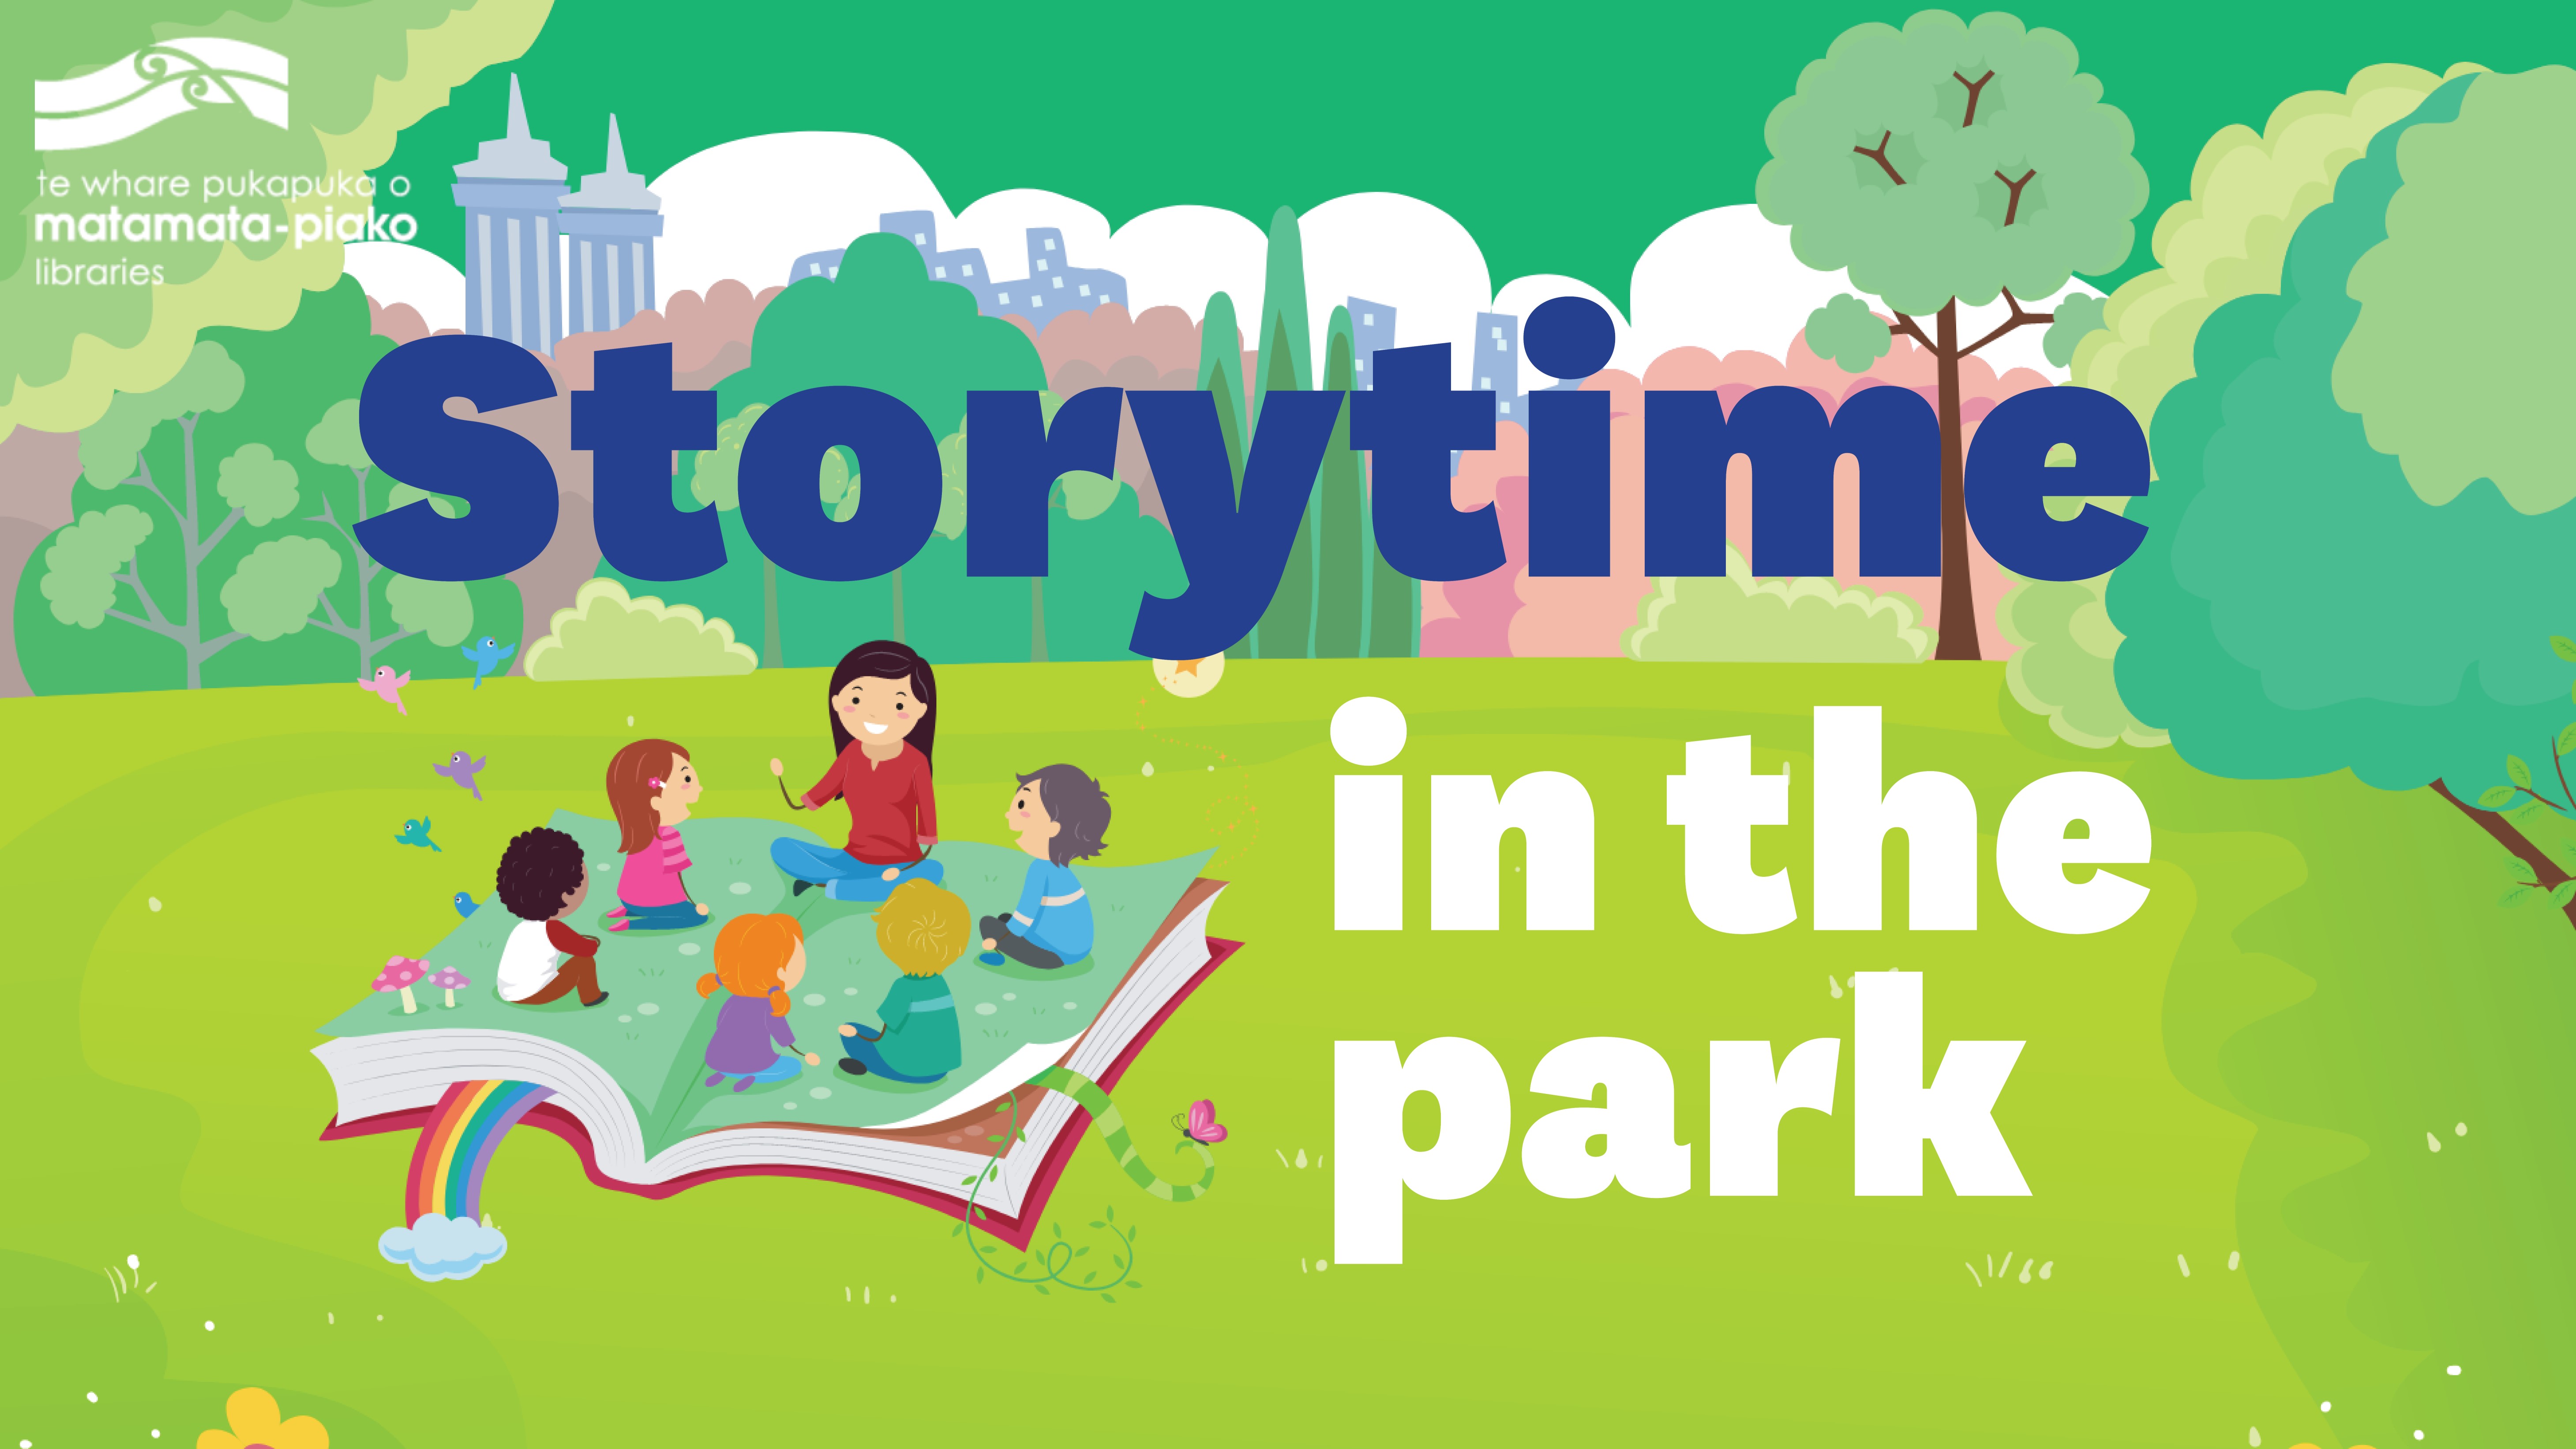 Storytime in the park image